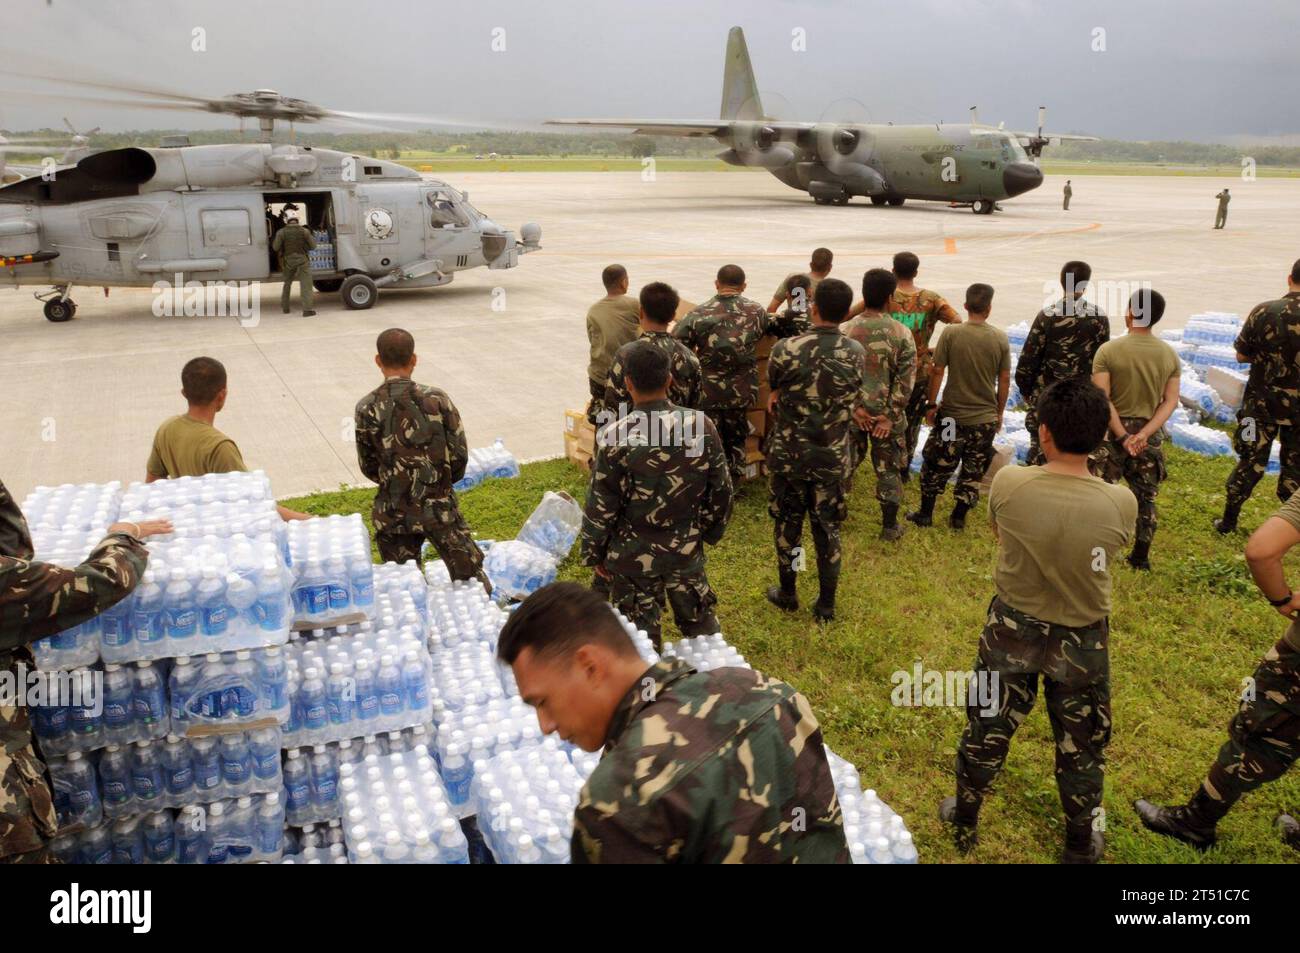 0806265961C-011  KALIBO, Philippines (June 26, 2008) Servicemen of the Philippine Army stage themselves to transport bottled water to aircrafts assigned to the U.S. Navy and the Republic of the Philippines Air Force. The U.S. Navy and the Philippine Army and Air Force have been working side by side during disaster relief in the wake of Typhoon Fengshen. At the request of the government of the Republic of the Philippines, the Nimitz-class aircraft carrier USS Ronald Reagan (CVN 76) is off the coast of Panay Island providing humanitarian assistance and disaster response. Ronald Reagan and other Stock Photo